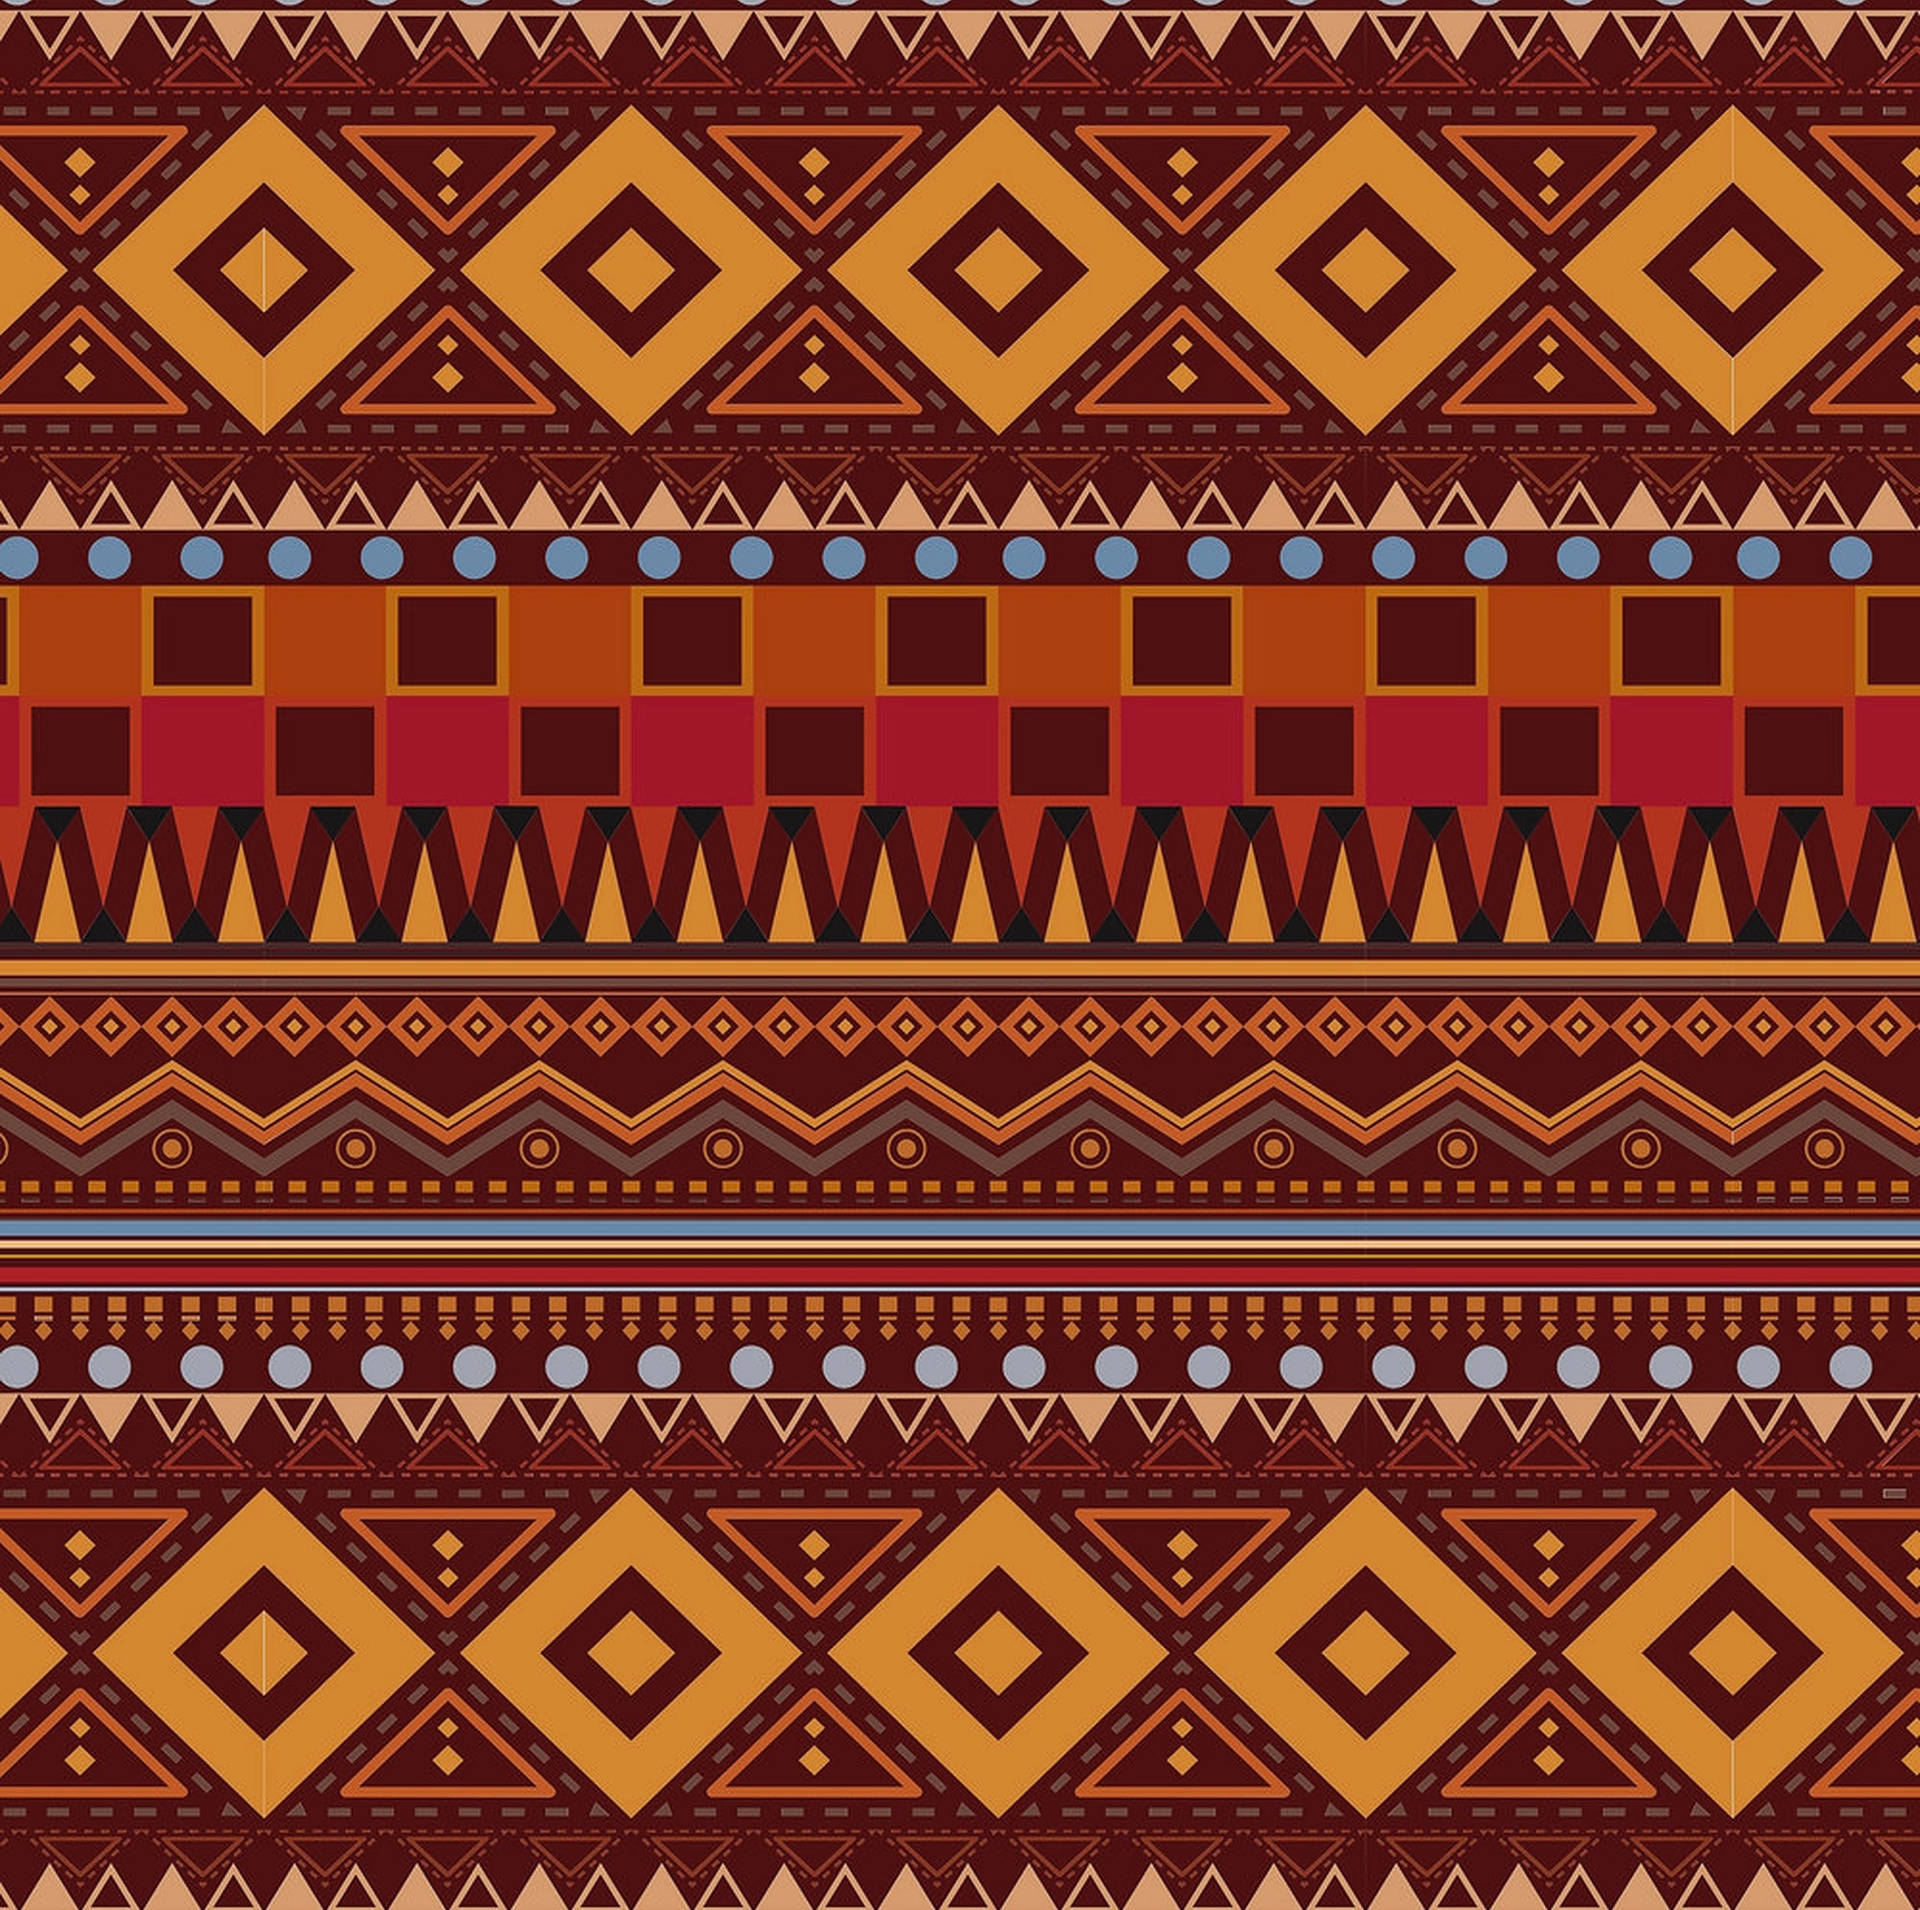 Tribal Print Backgrounds